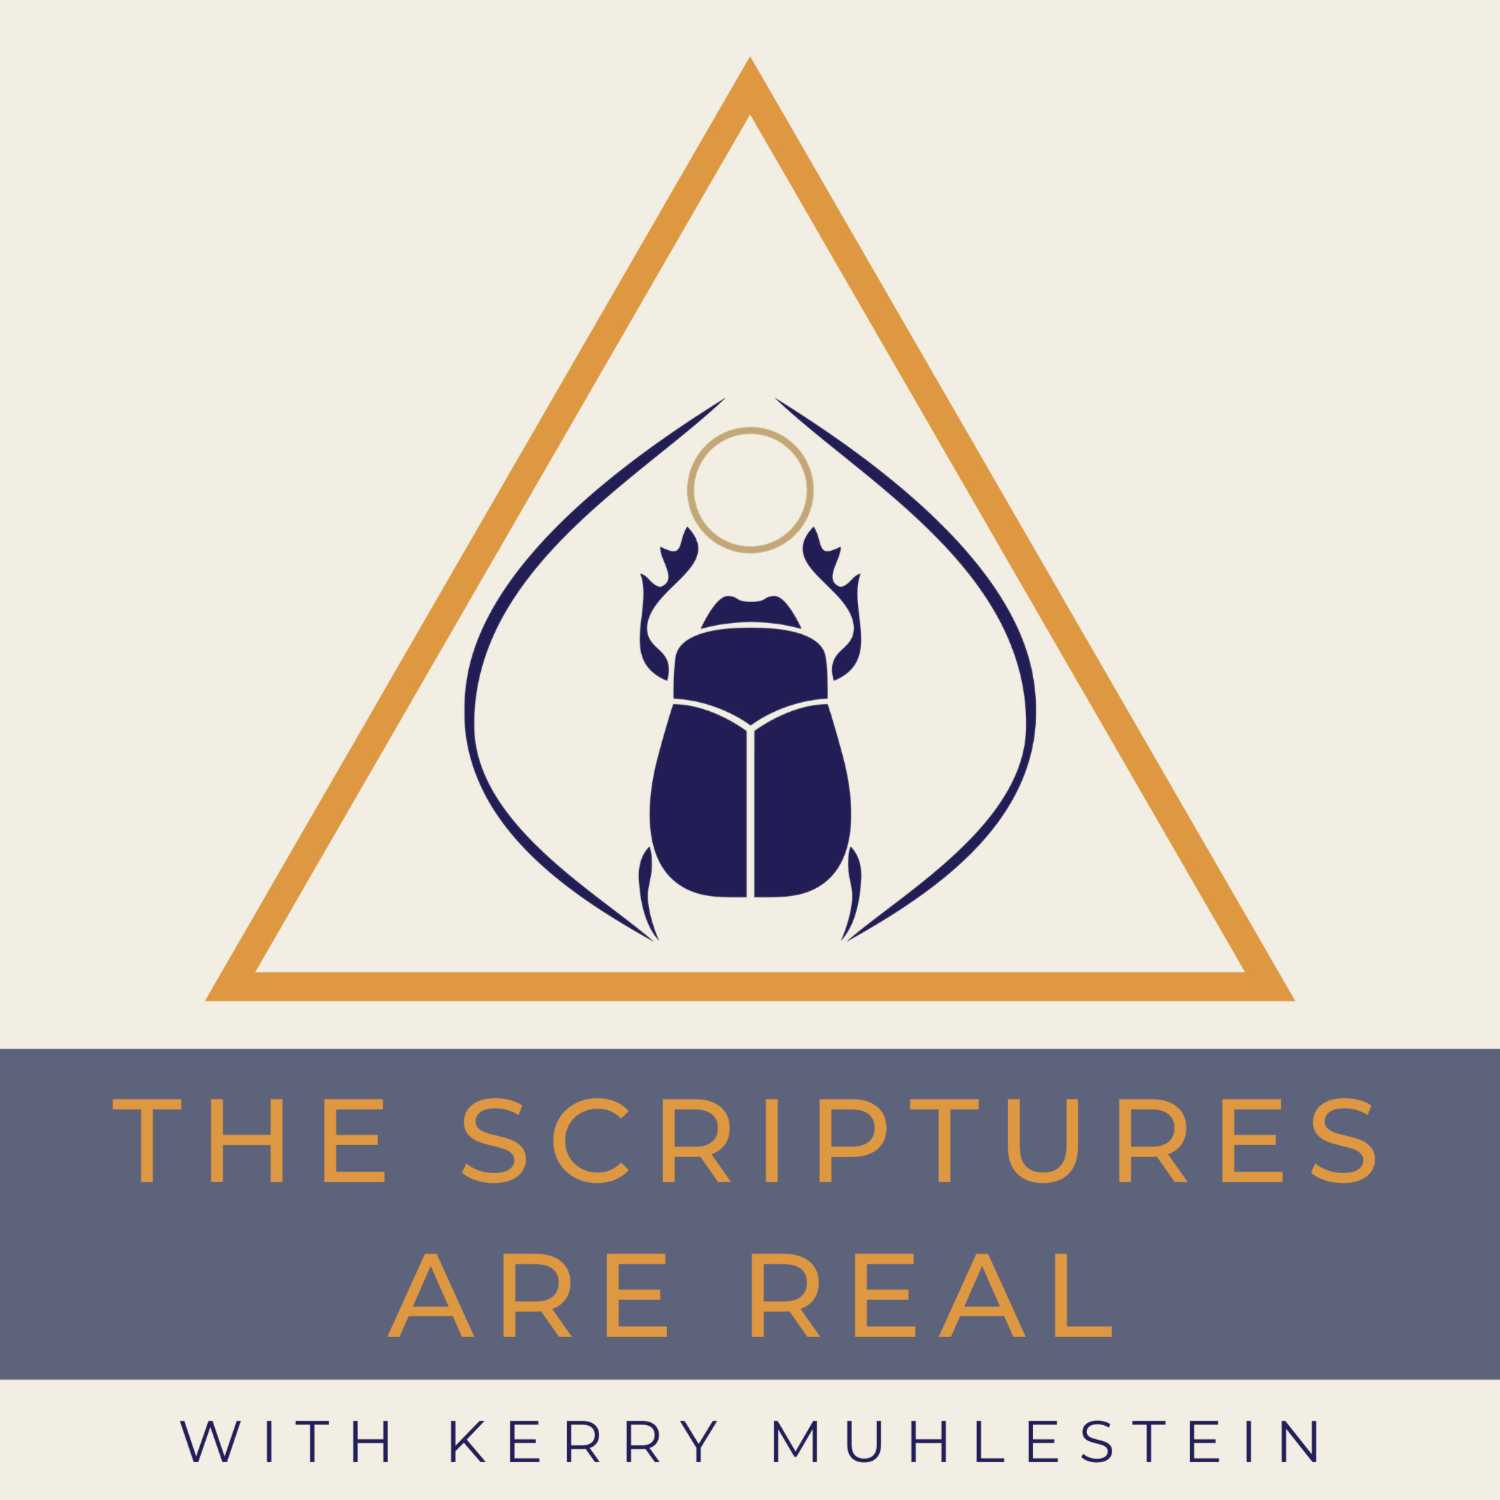 S2 E98 Saints Unscripted as a tool for understanding the Gospel and Scriptures (week of Dec. 25, 2nd episode)